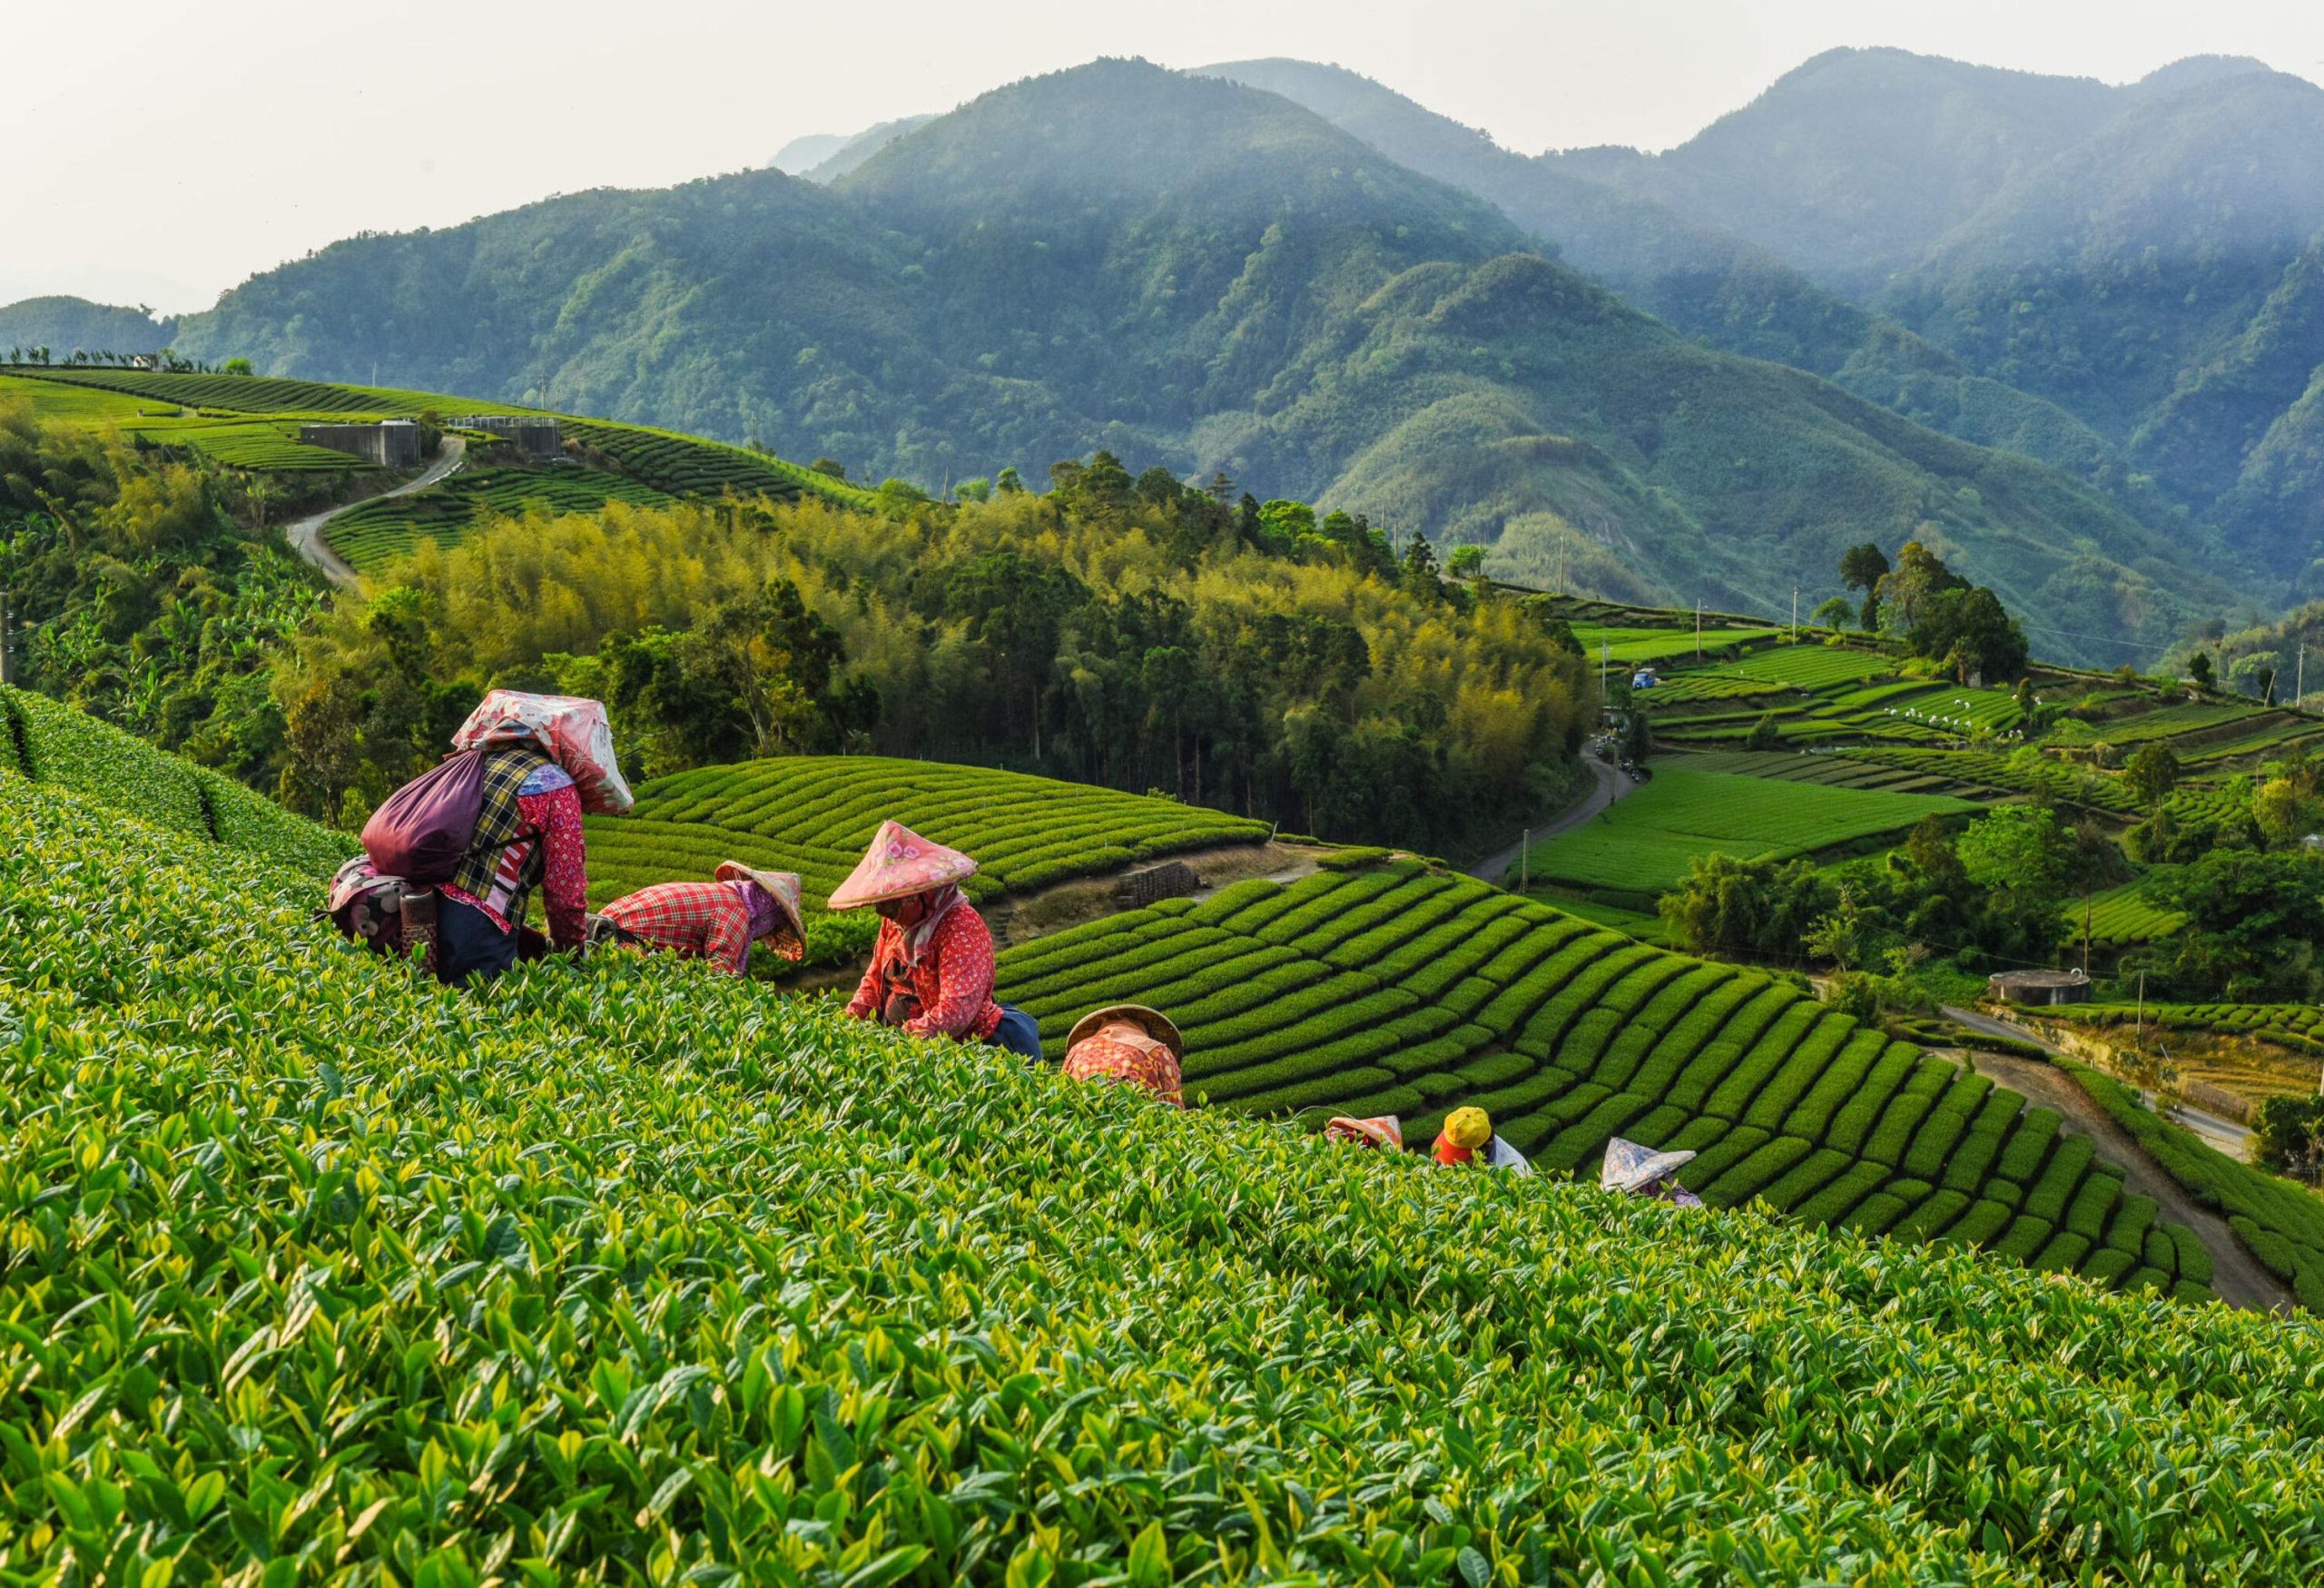 People harvest tea leaves on rolling hills planted with tea plants overlooking forested mountains.